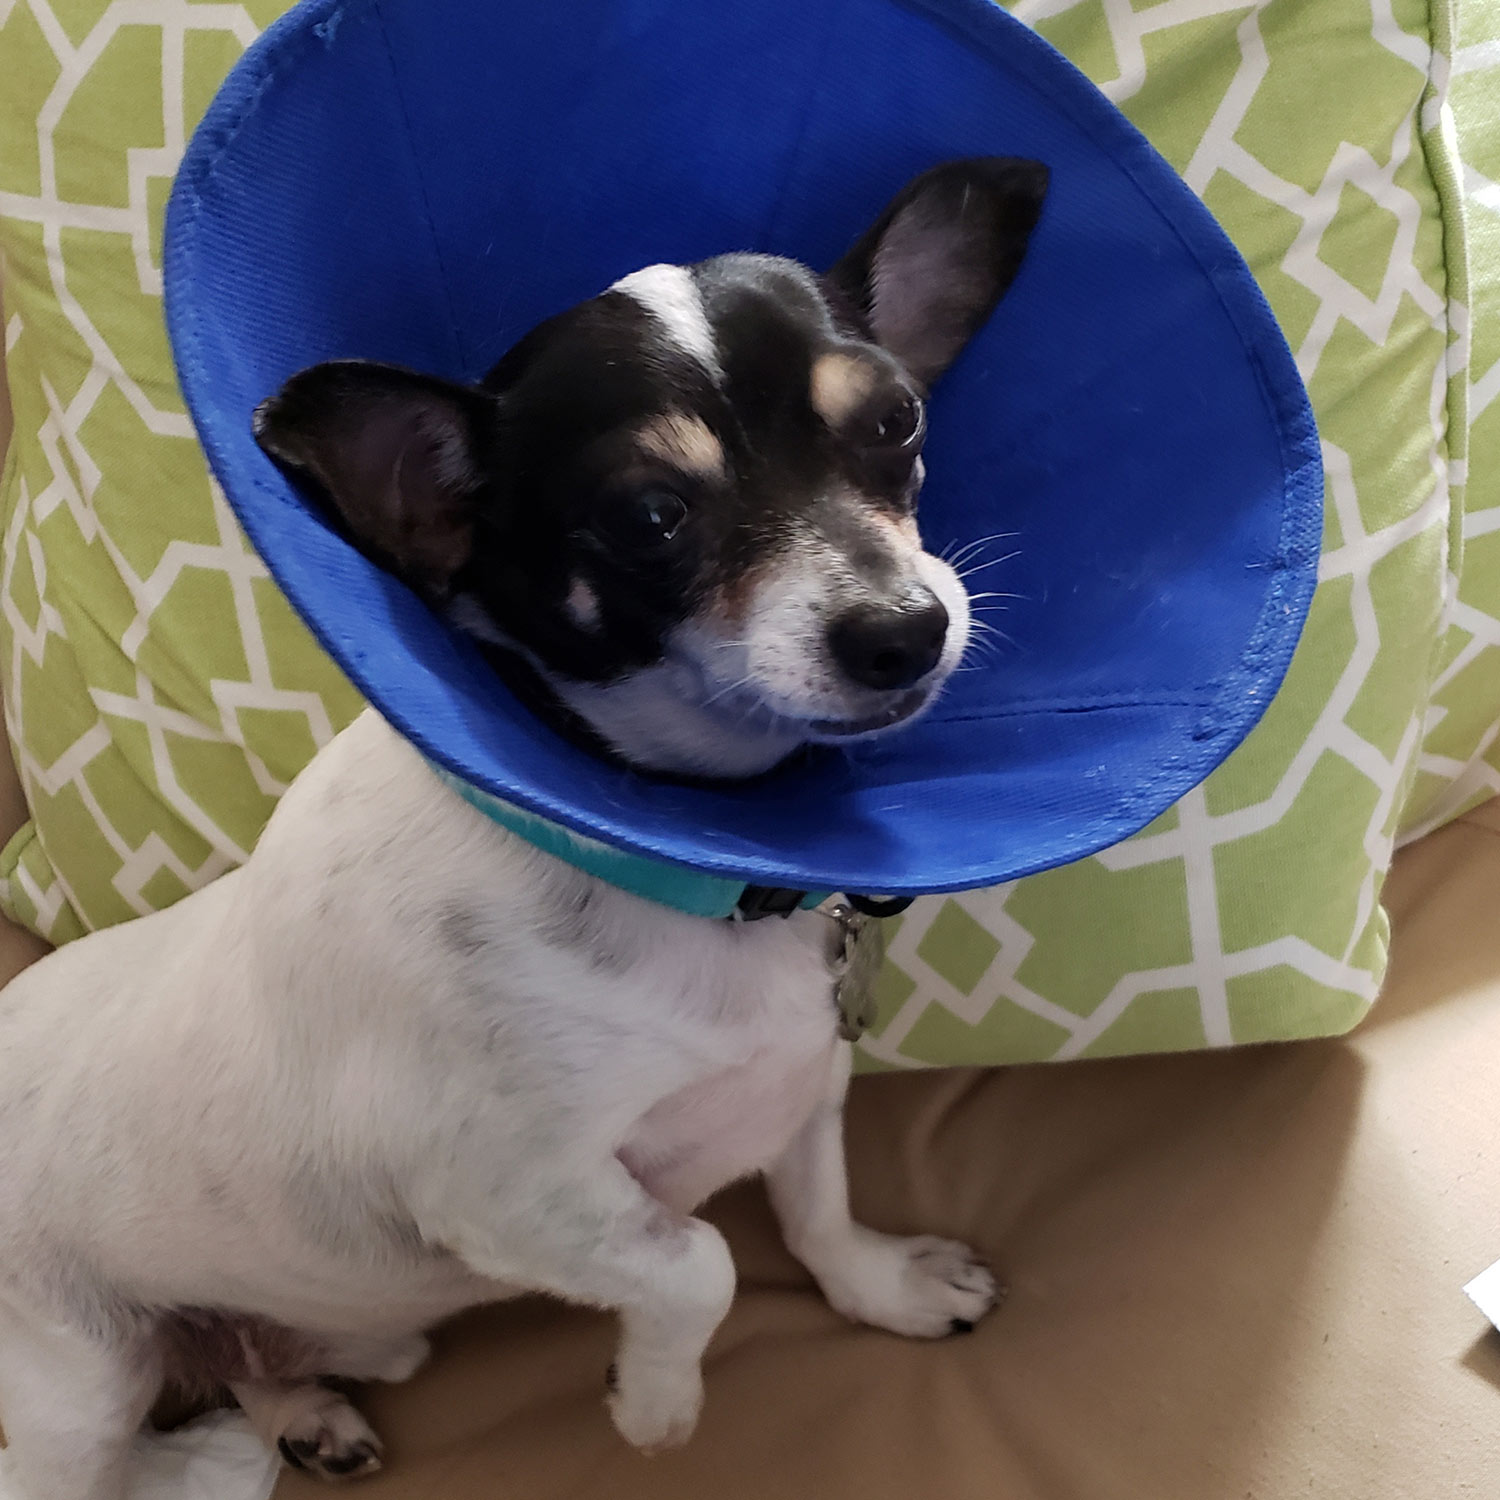 Duncan a pet pal alum is back after having his teeth professionally cleaned Hes wearing the cone of shame so he wont scratch his mouth Pro cleanings are important to keep the mouth and teeth healthy